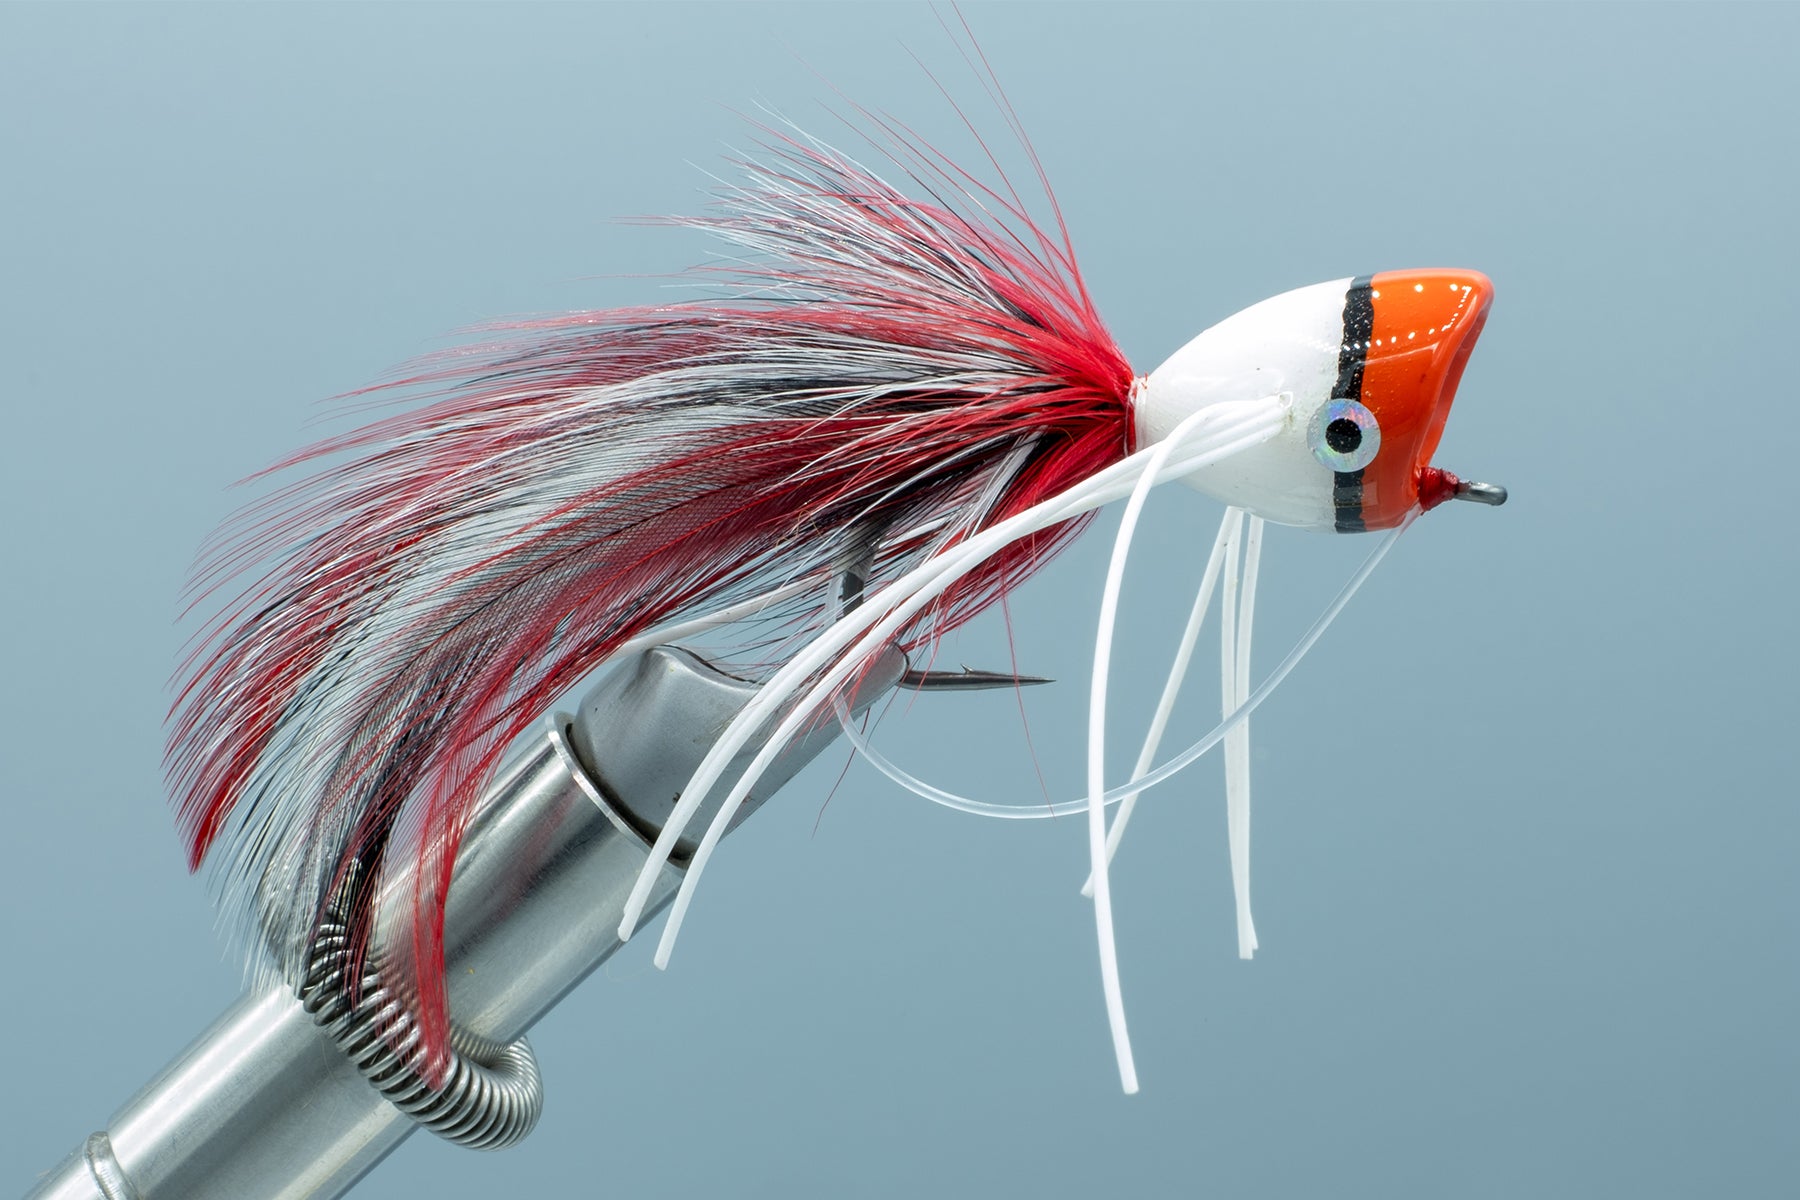 REDINGTON FIELD KIT TROUT SPEY - FRED'S CUSTOM TACKLE